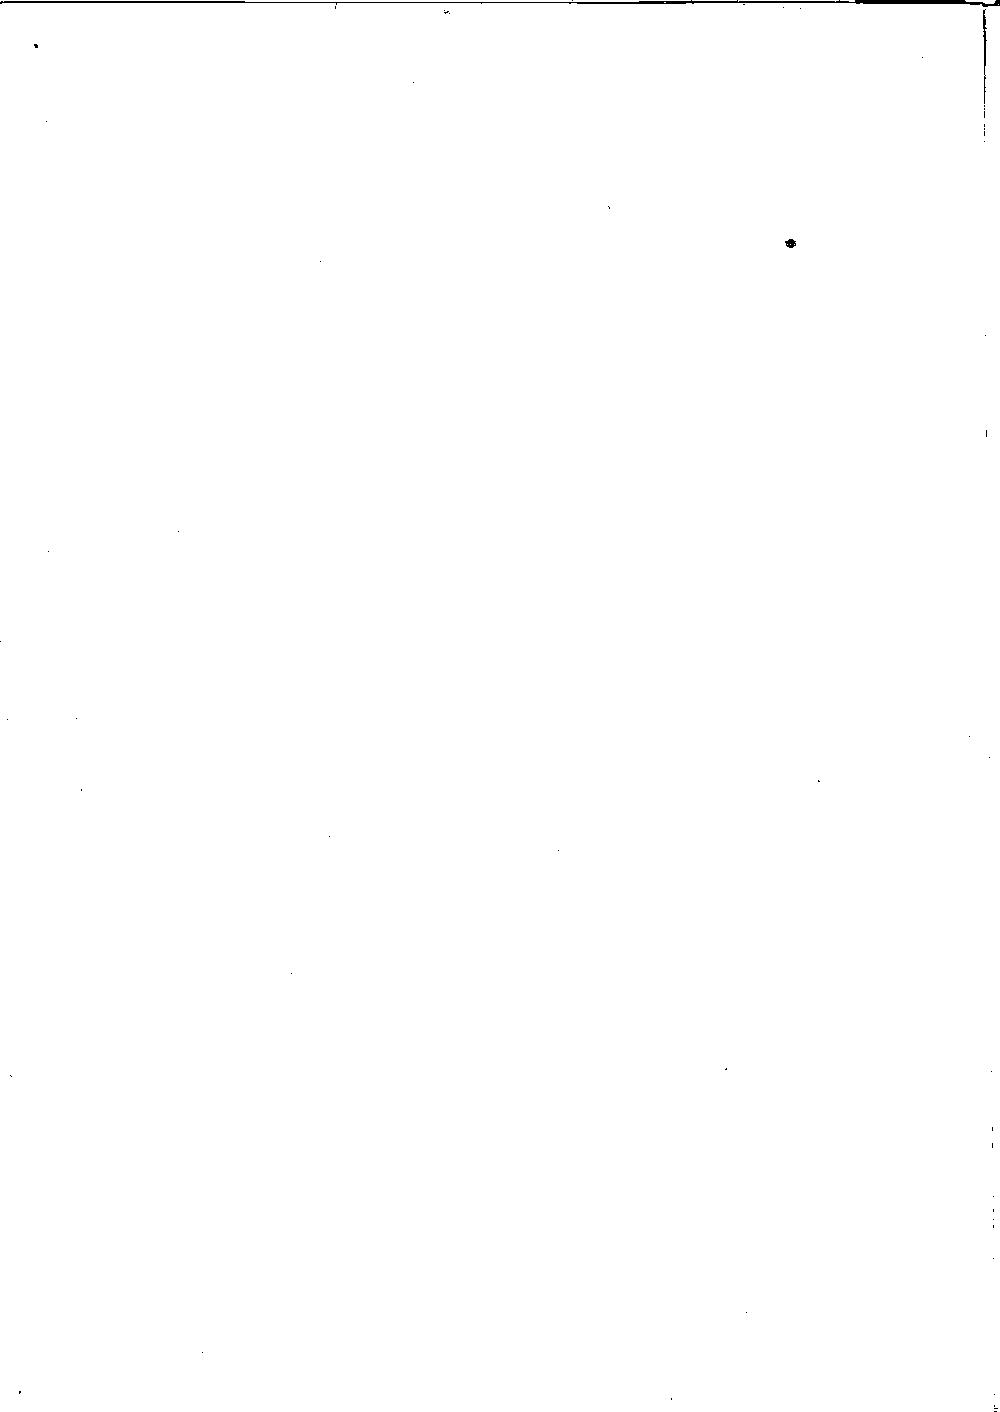 Scan of page 560